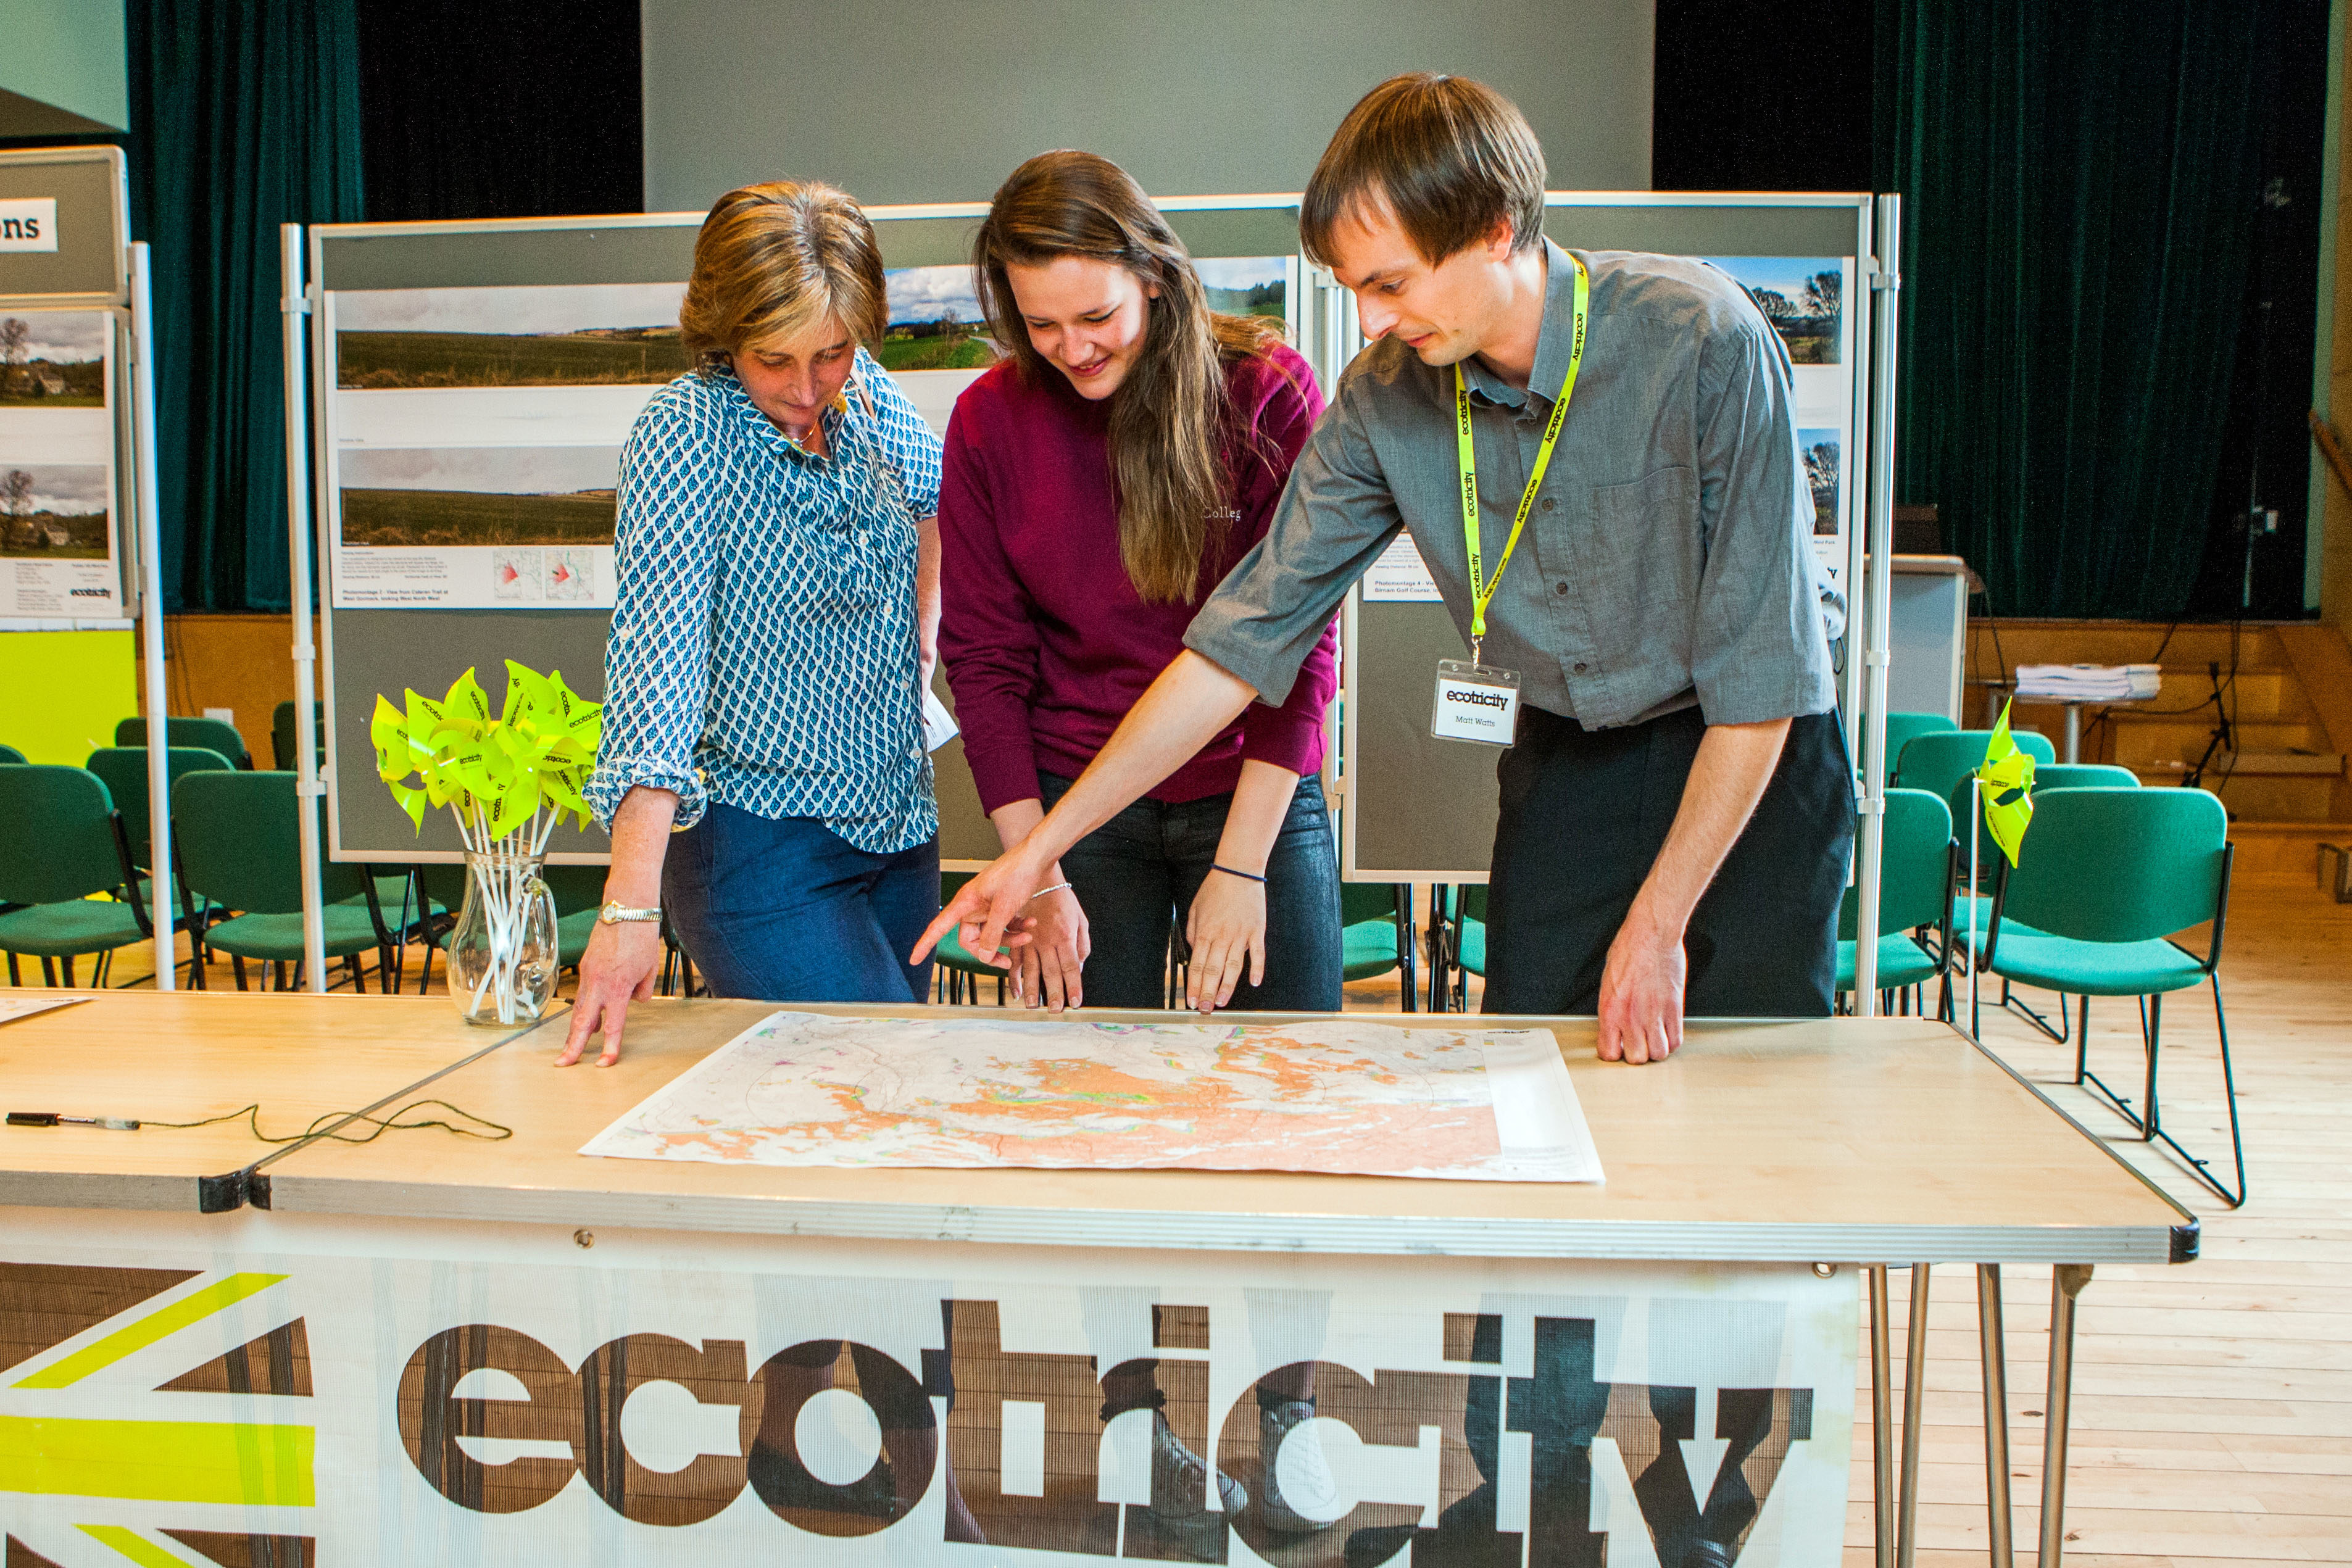 Ecotricity held a public consultation in 2017 ahead of the Scottish Ministers' decision.